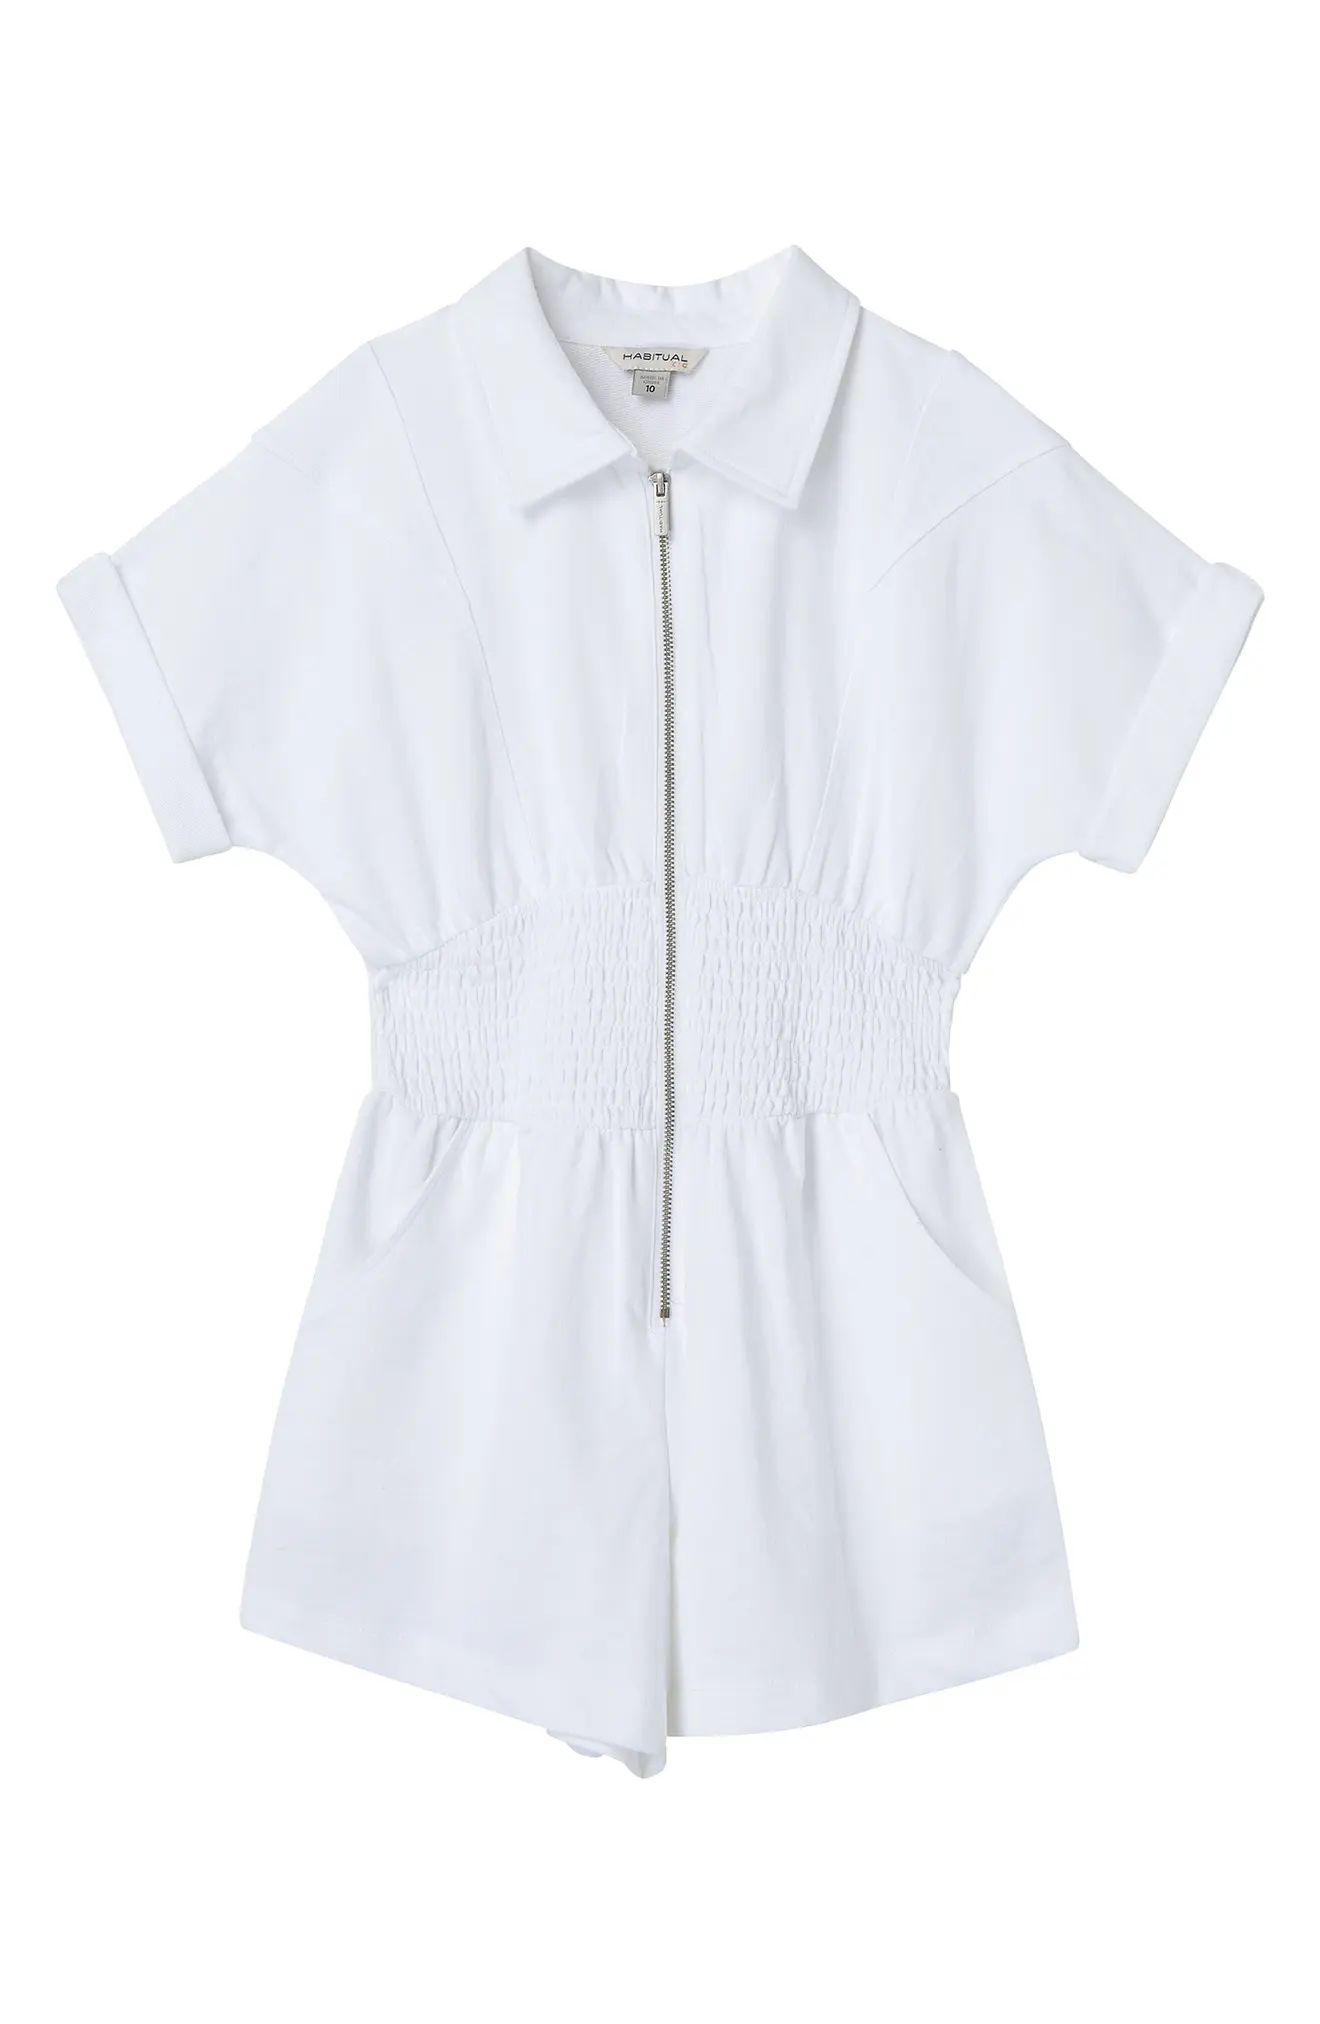 Habitual Kids' Smock Waist Terry Romper in White at Nordstrom, Size 16 | Nordstrom